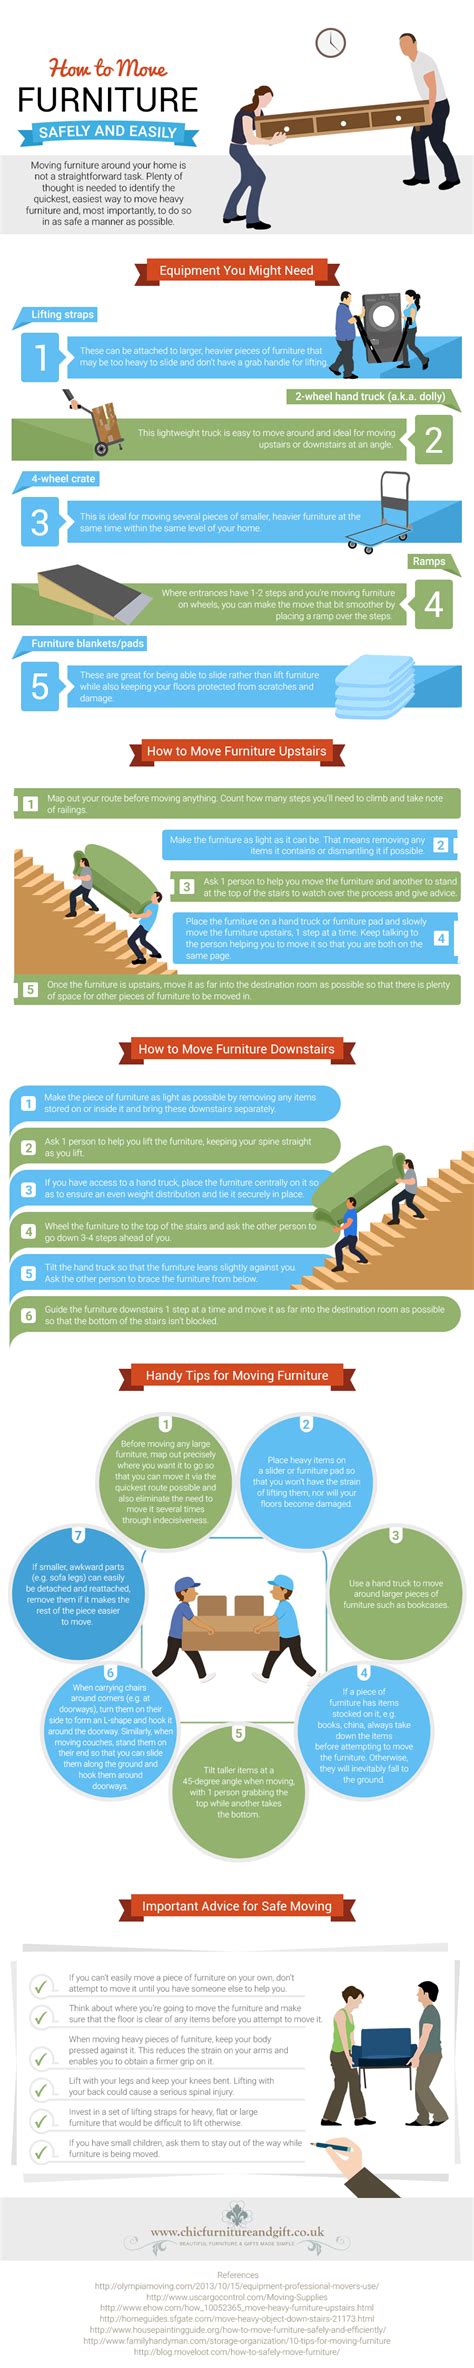 How To Move Furniture Safely And Easily Infographic Bruzzese Home